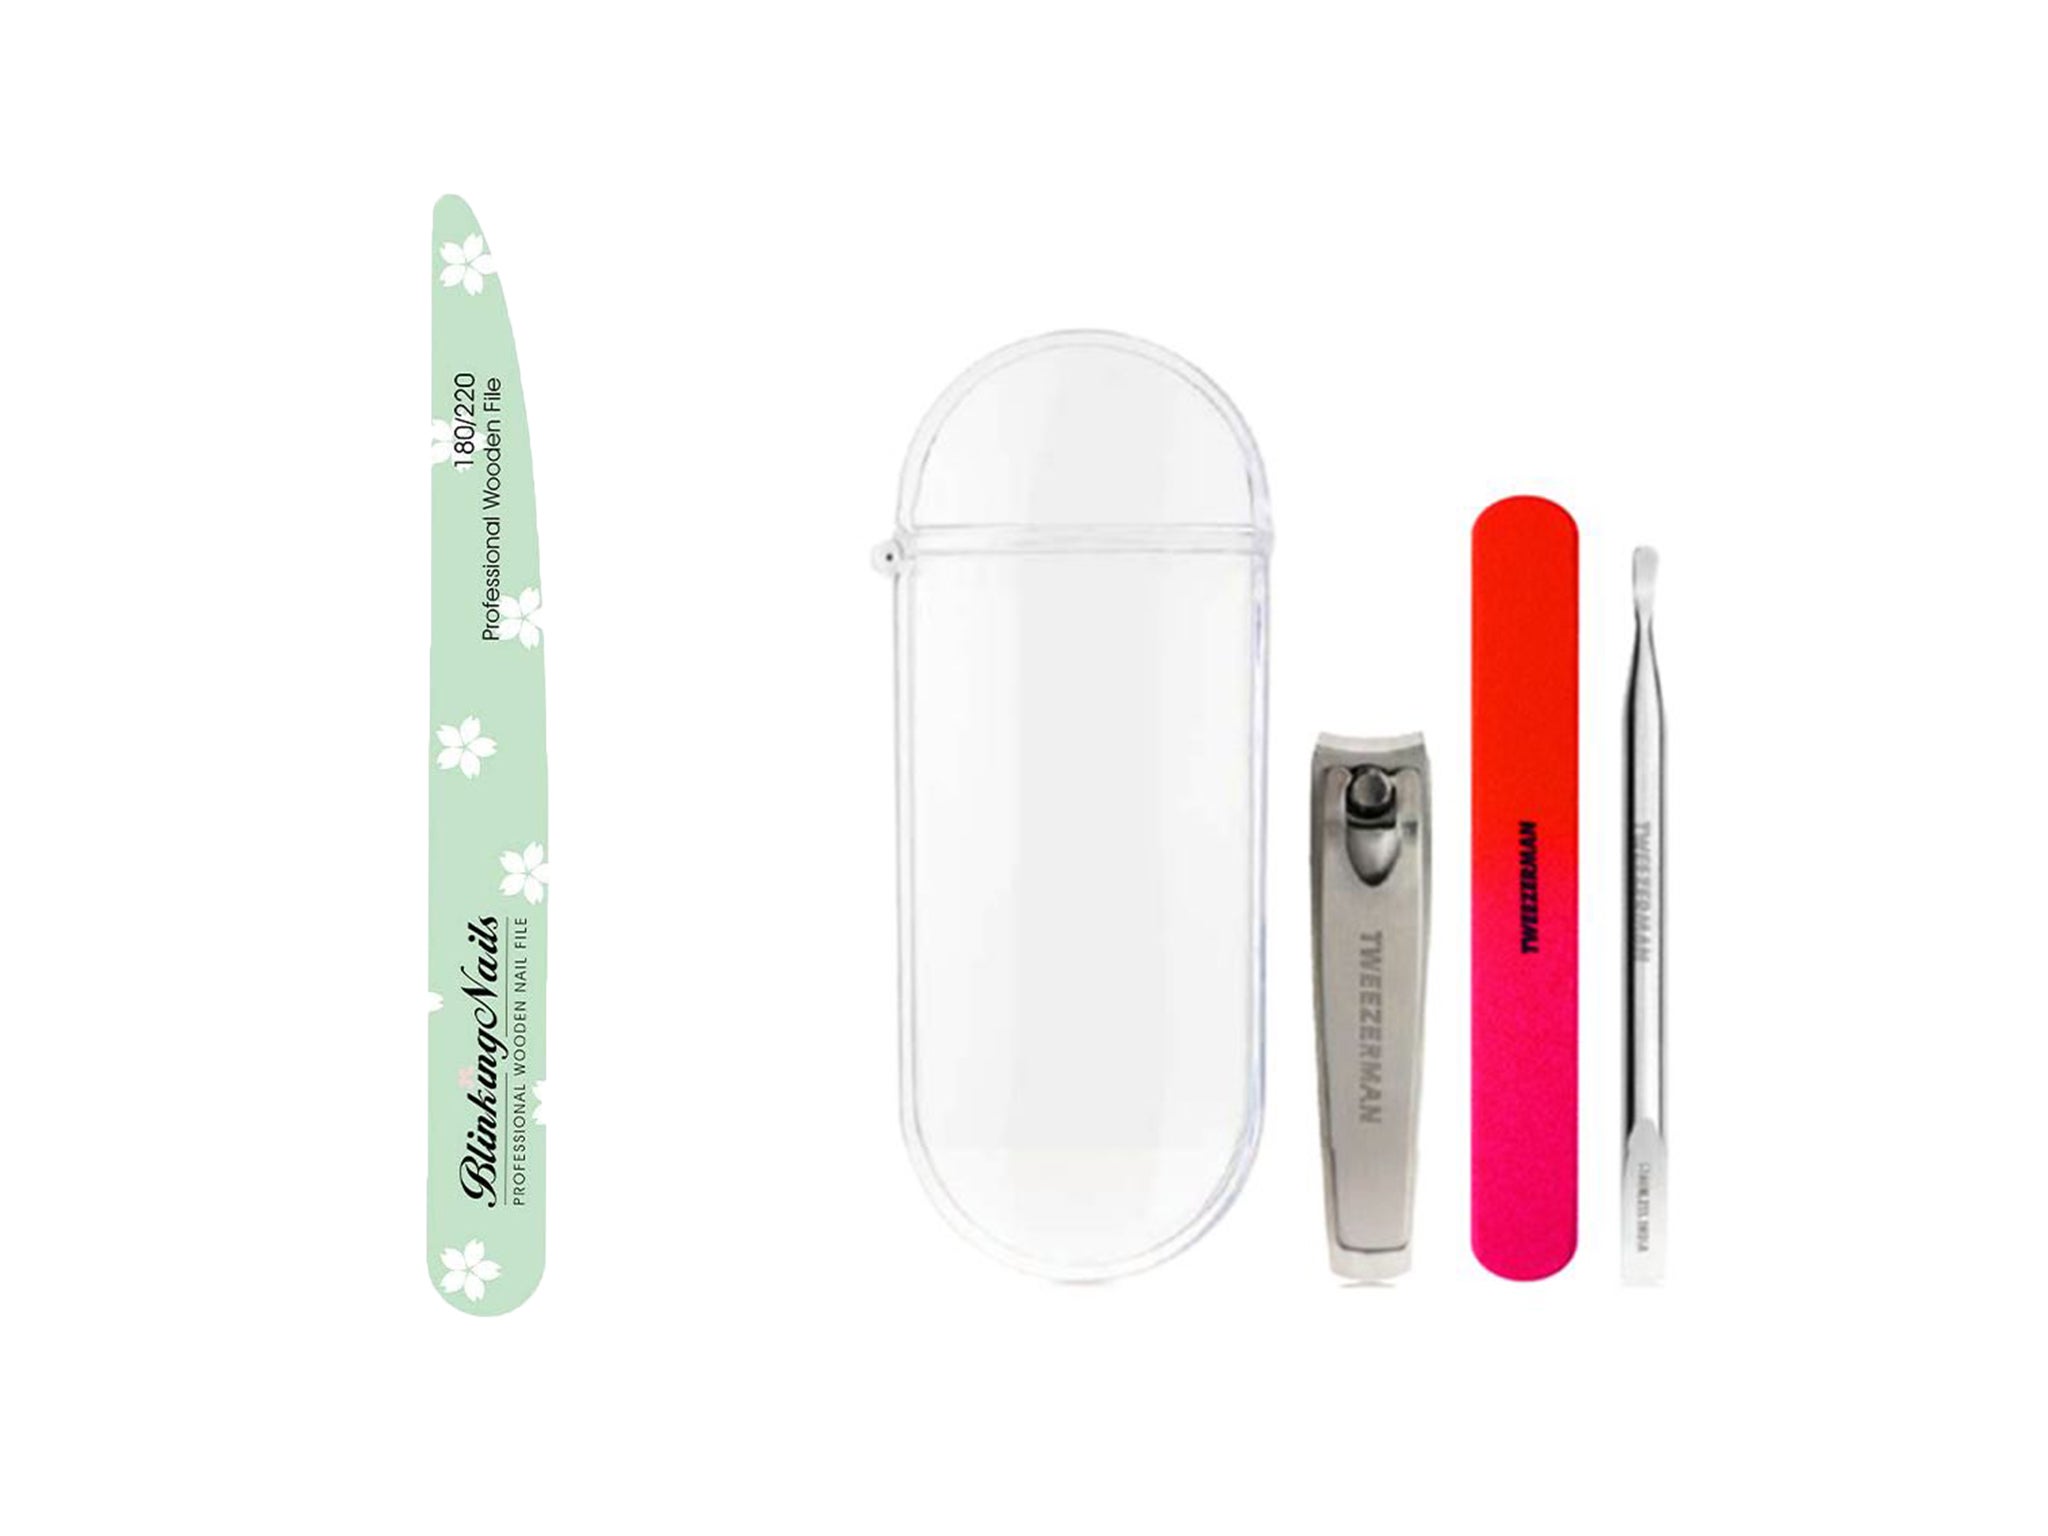 A cuticle pusher, nail clippers and a nail file are the tools you'll need to master a manicure at home